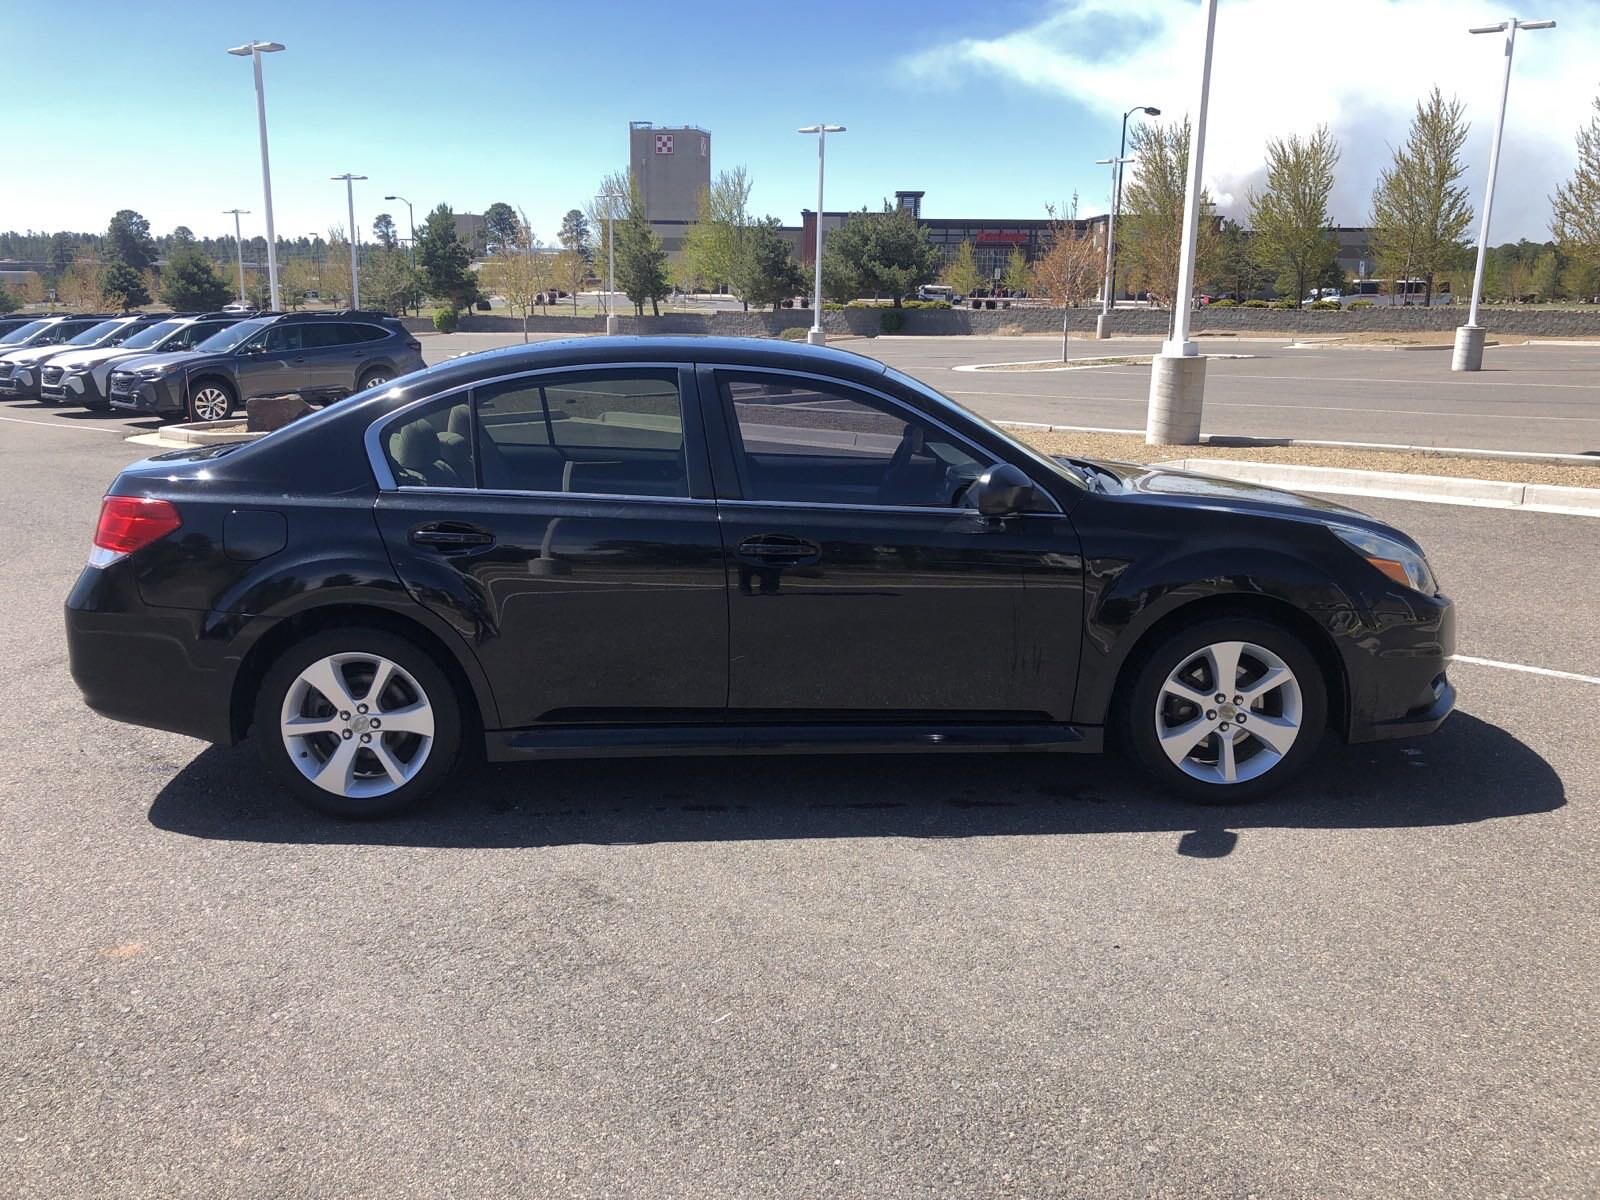 Used 2014 Subaru Legacy 2.5i with VIN 4S3BMAA64E1007119 for sale in Flagstaff, AZ